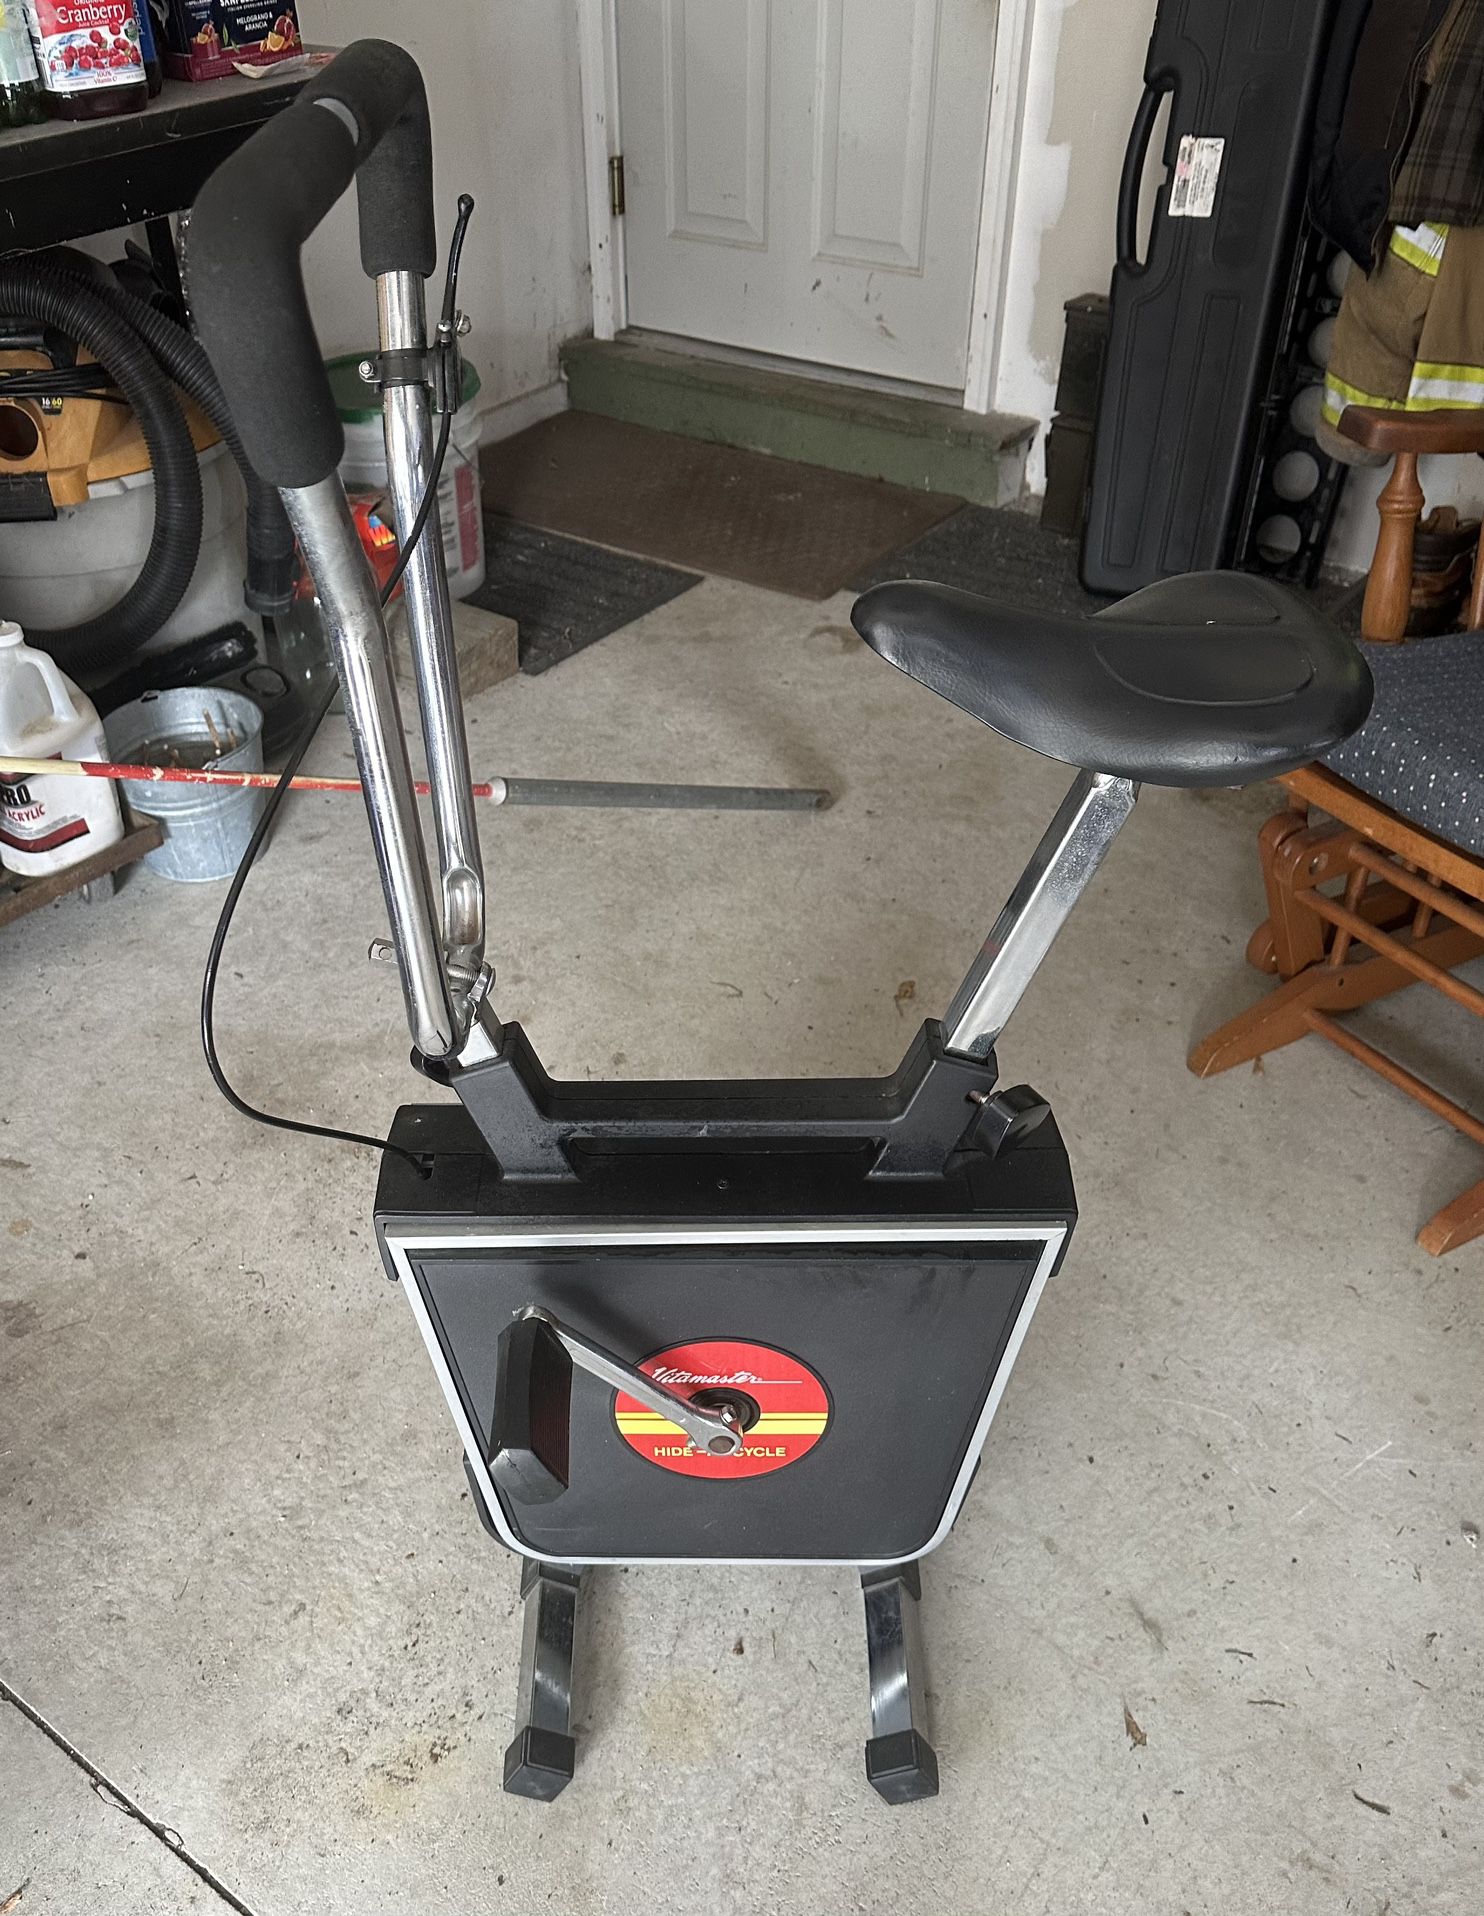 Vintage Vitamaster Hide-A-Cycle Exercise Bike! Great Shape!